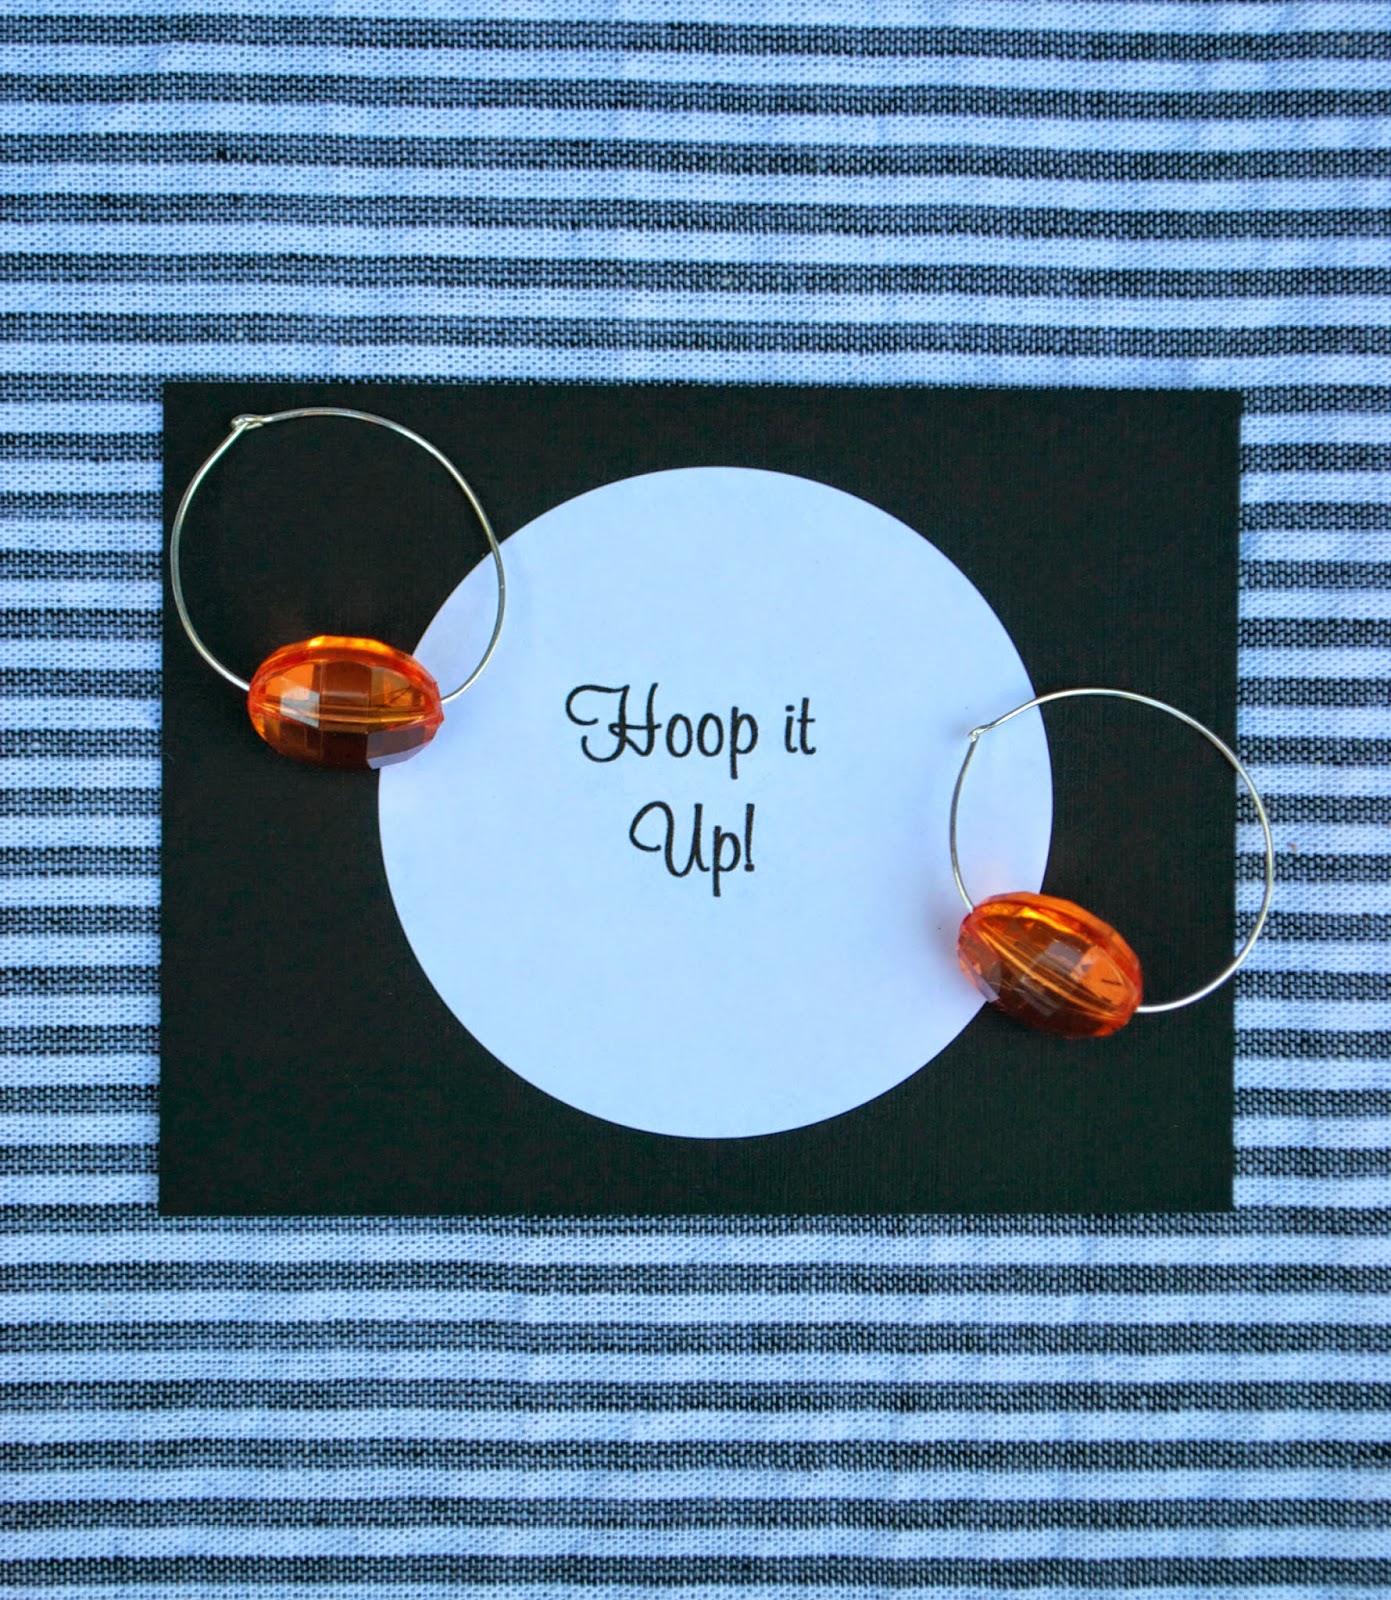 Basketball Hoop Earrings great Party Craft DIYs - 3 fun things to make for March Madness - www.jacolynmurphy.com